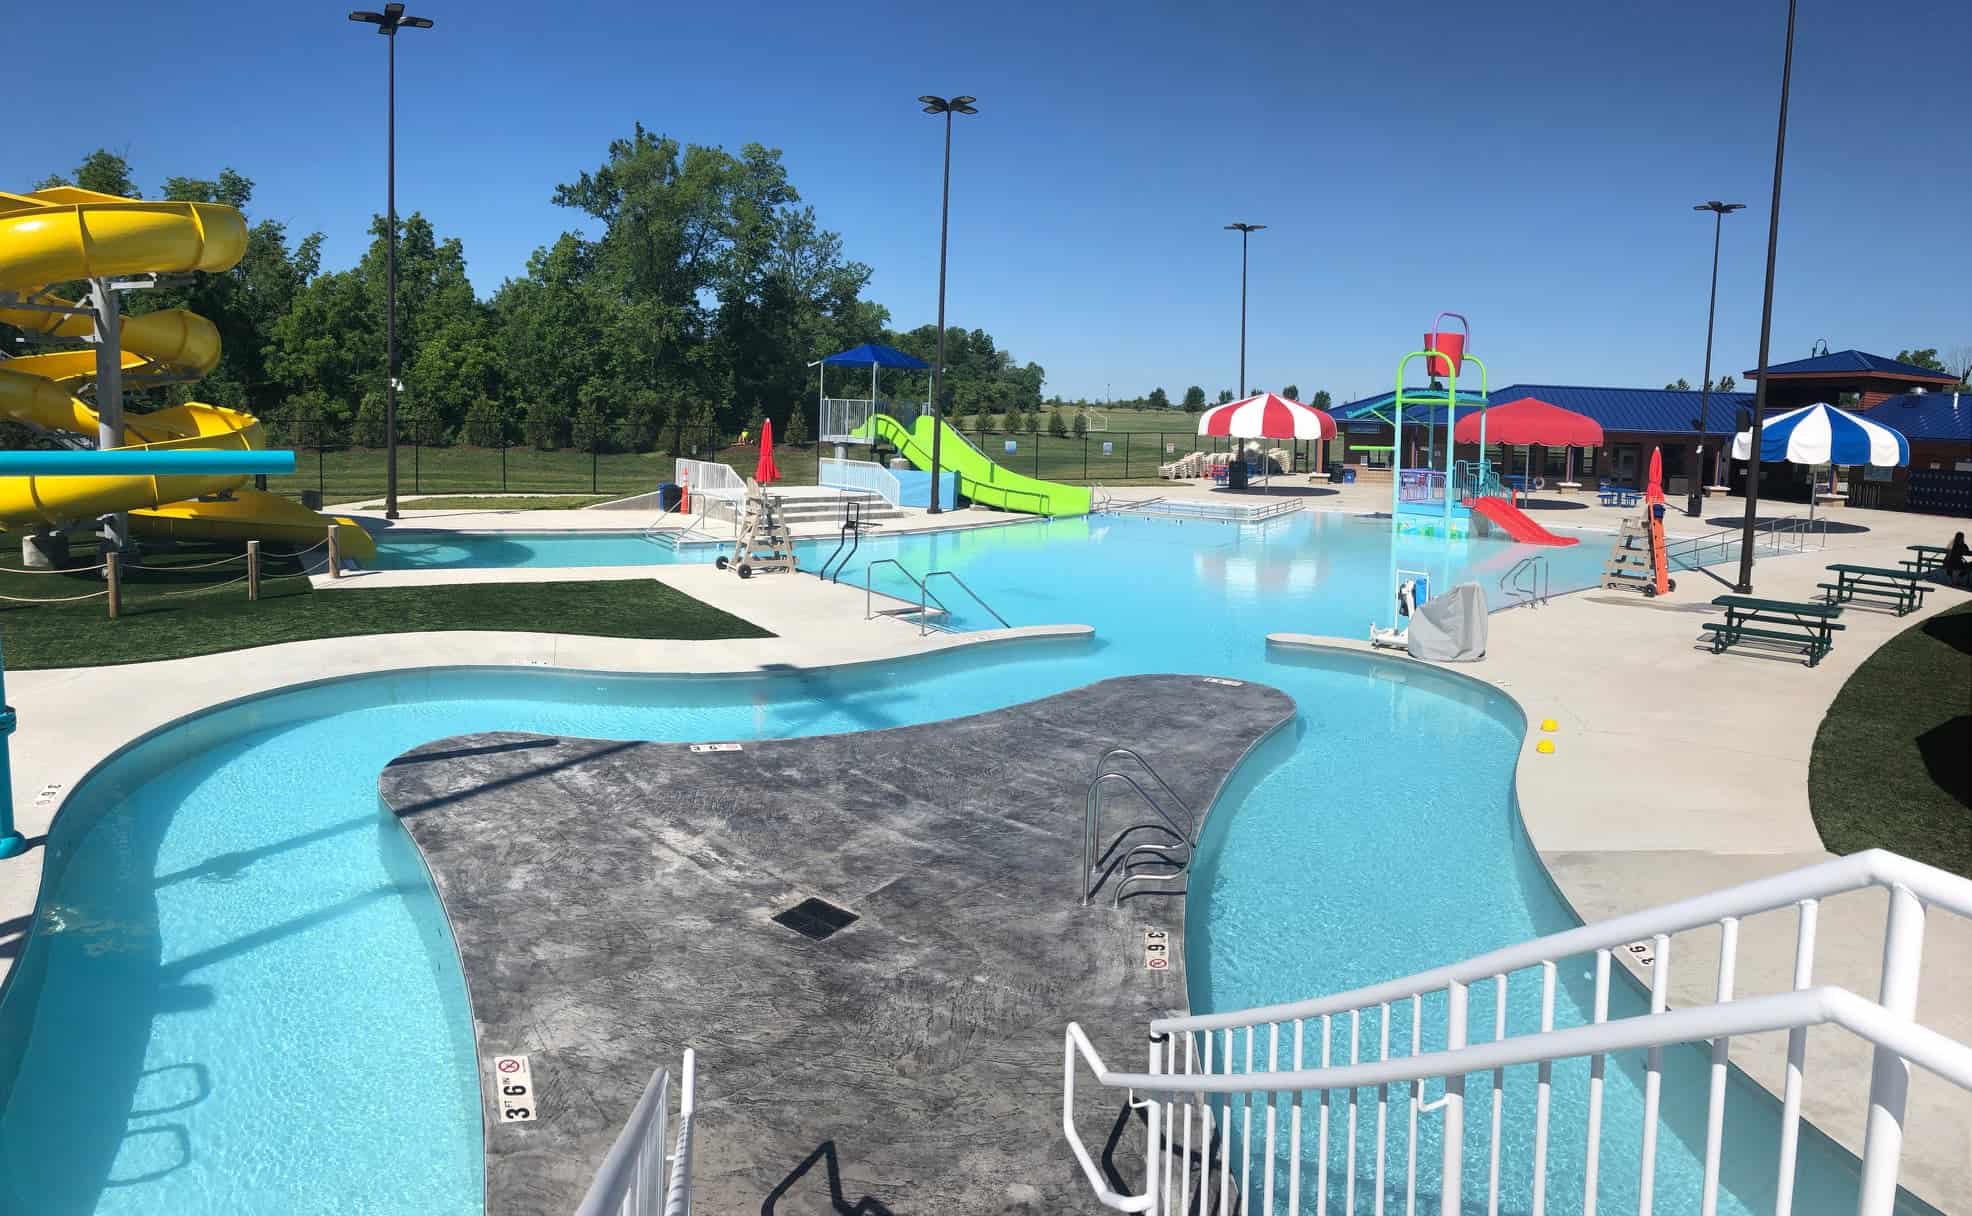 A pool and water park at Oxford Aquatic Center